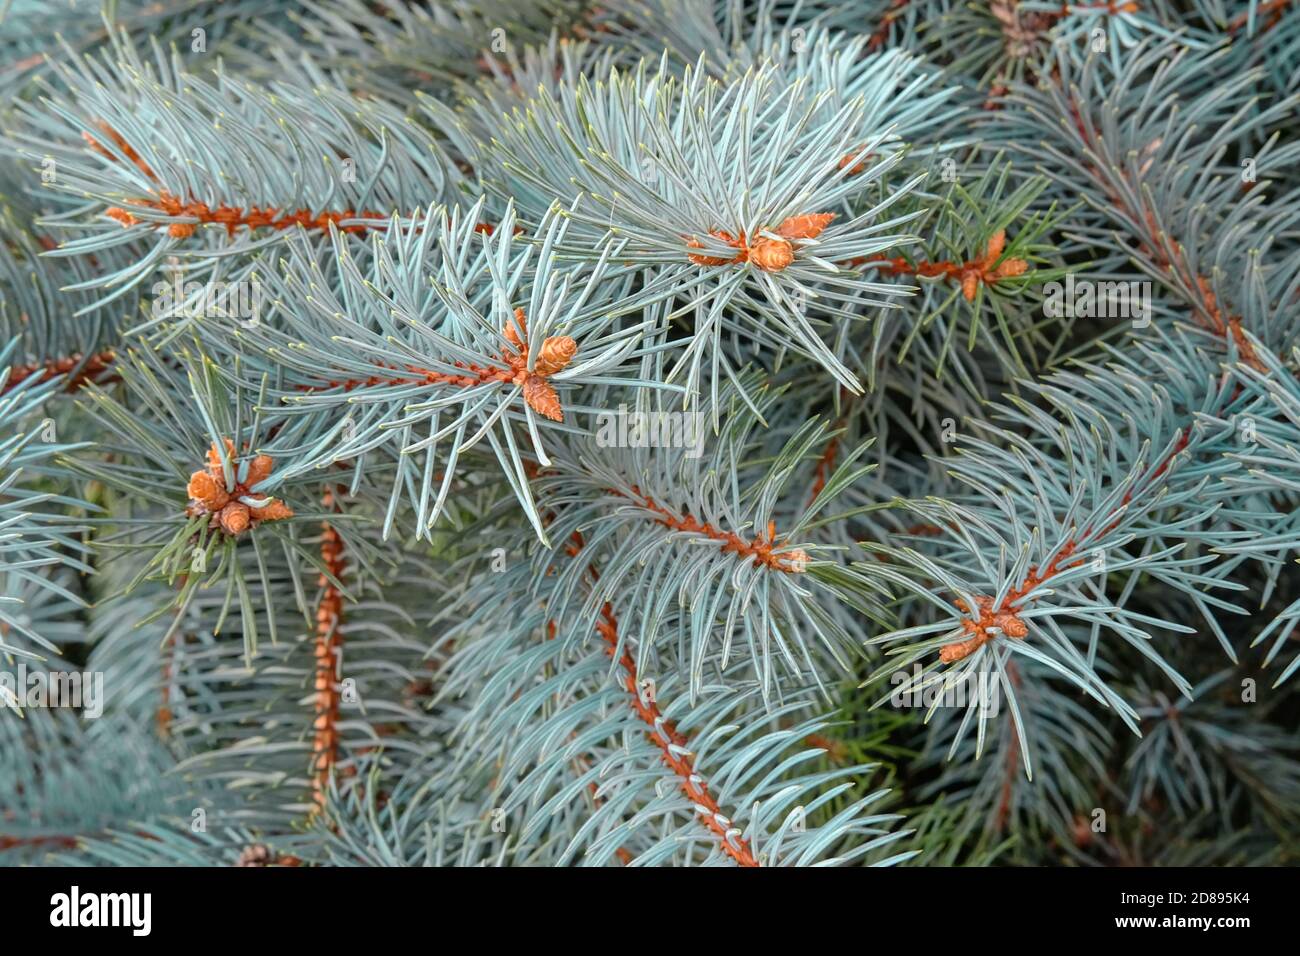 Natural Picea Pungens or Colorado Blue Spruce branches with young cones buds for abstract texture or seasonal background Stock Photo